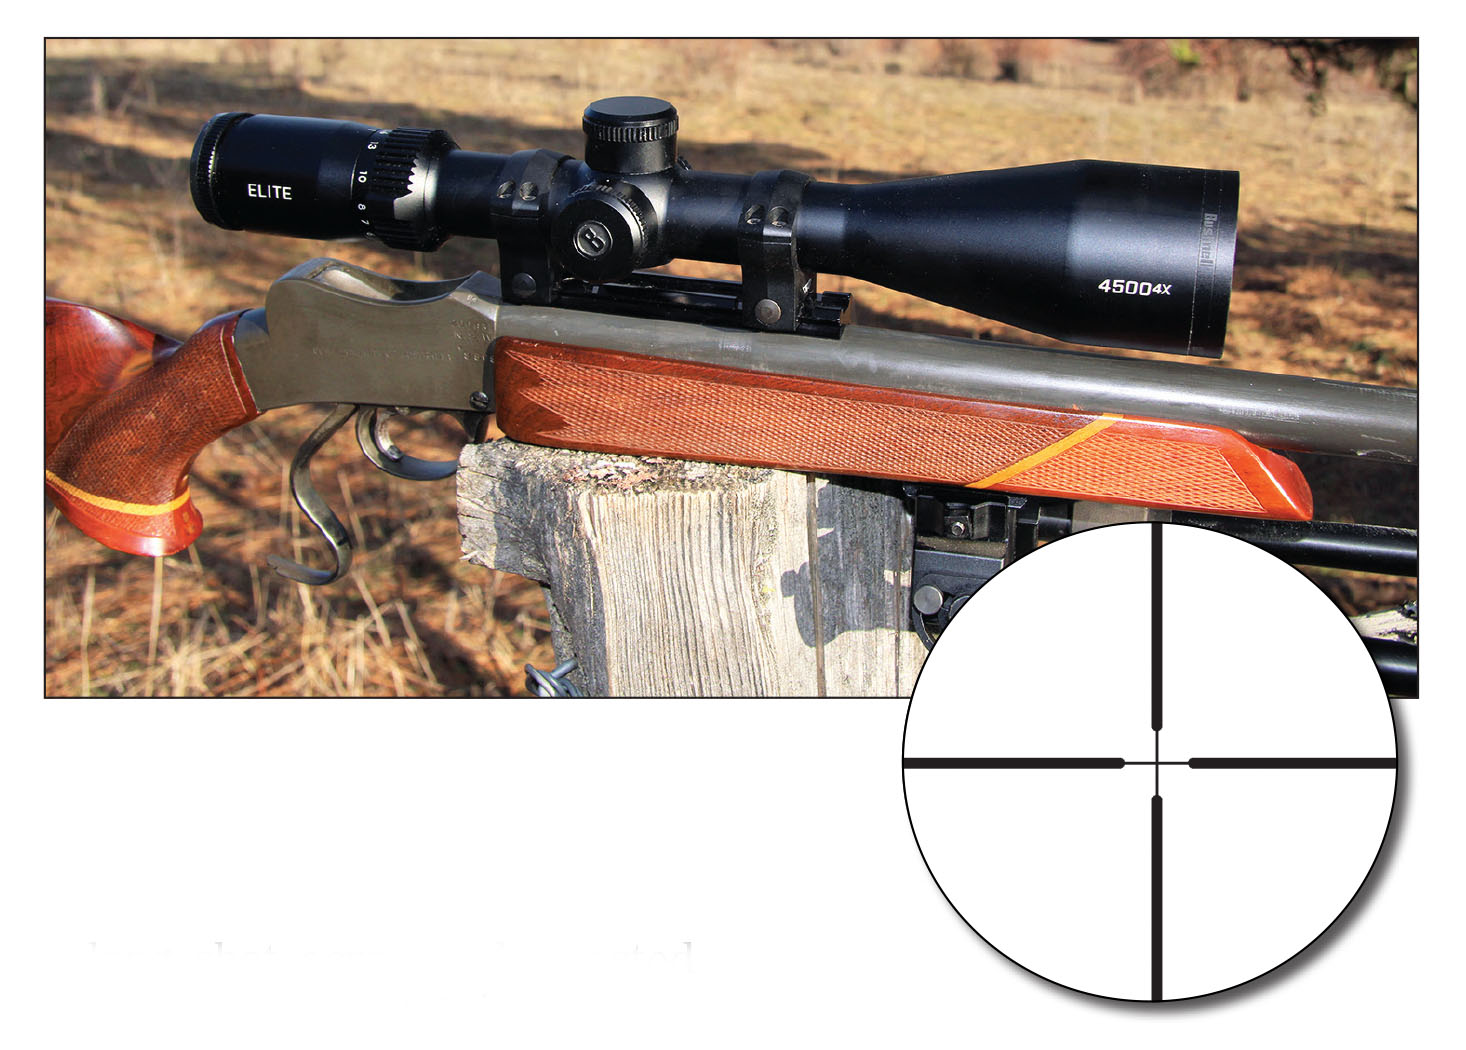 The Bushnell Elite 4500 4x 4-16x 50mm Multi-X scope offers a lightweight and affordable option to fill nearly any rifle need, from a rimfire to a heavy centerfire magnum.